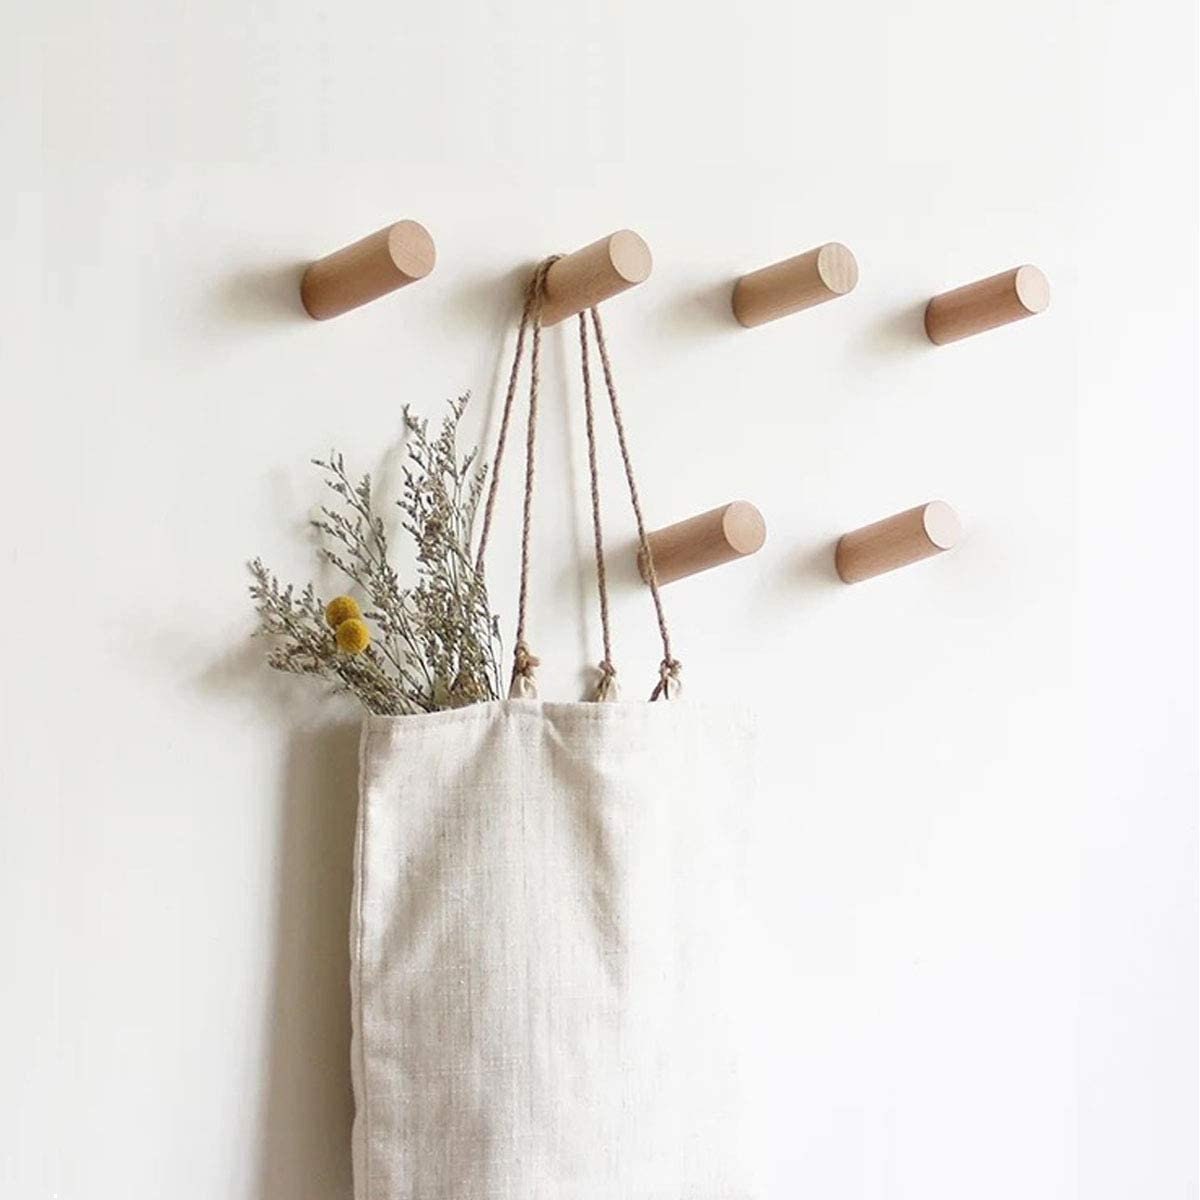 Natural Wooden Wall Hooks - Pack of 6 - Wall Mounted Modern Hook - Handmade  Decorative Wood Coat Pegs - Minimalist Hooks for Hanging Hat, Coats